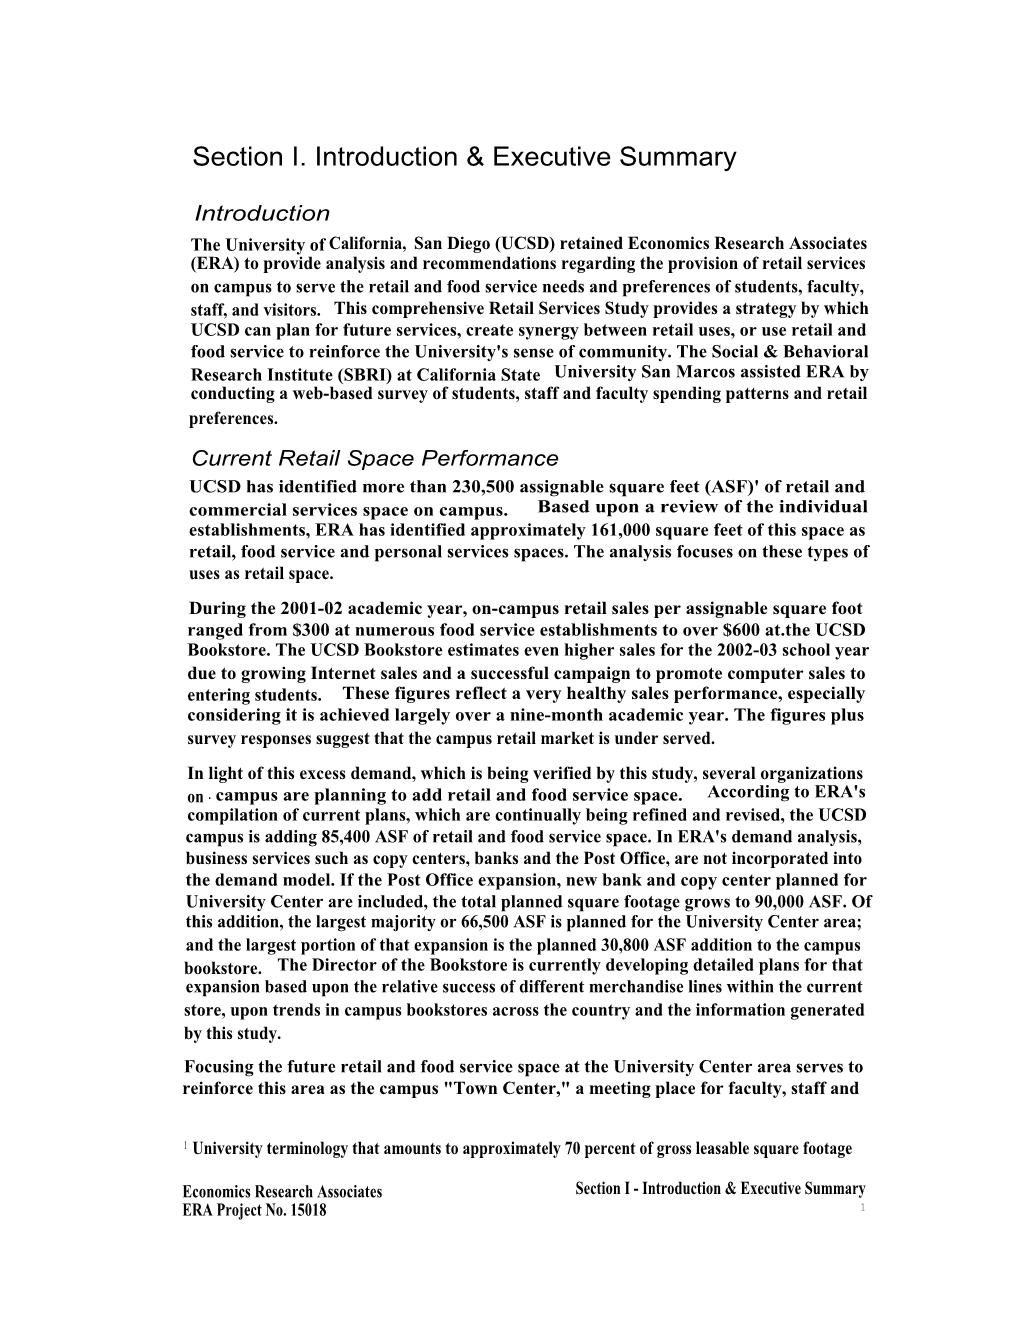 Executive Summary of Final Report UCSD Retail Services